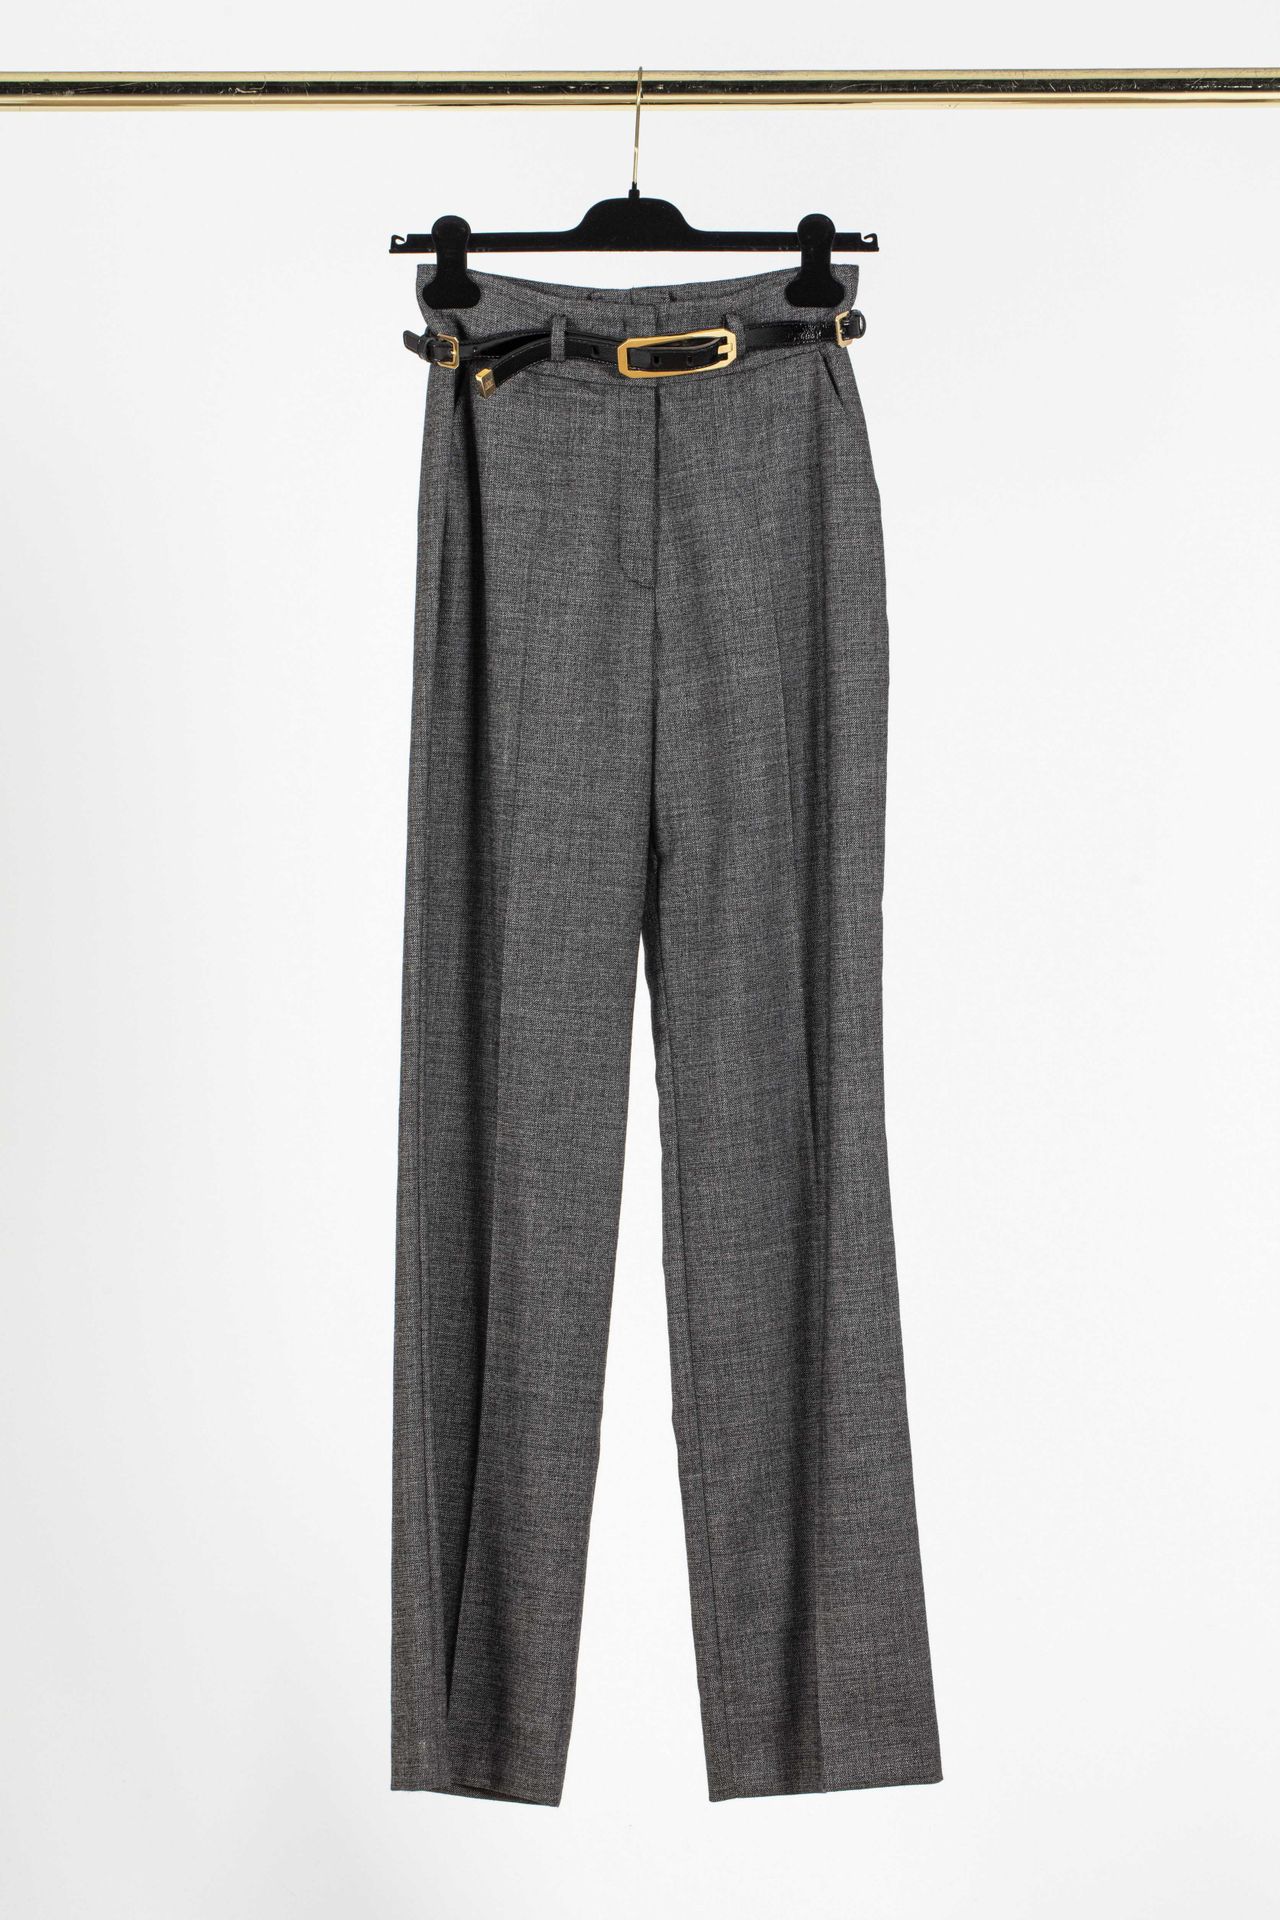 Null ESACADA : wide trousers in grey wool with a black patent leather belt, with&hellip;